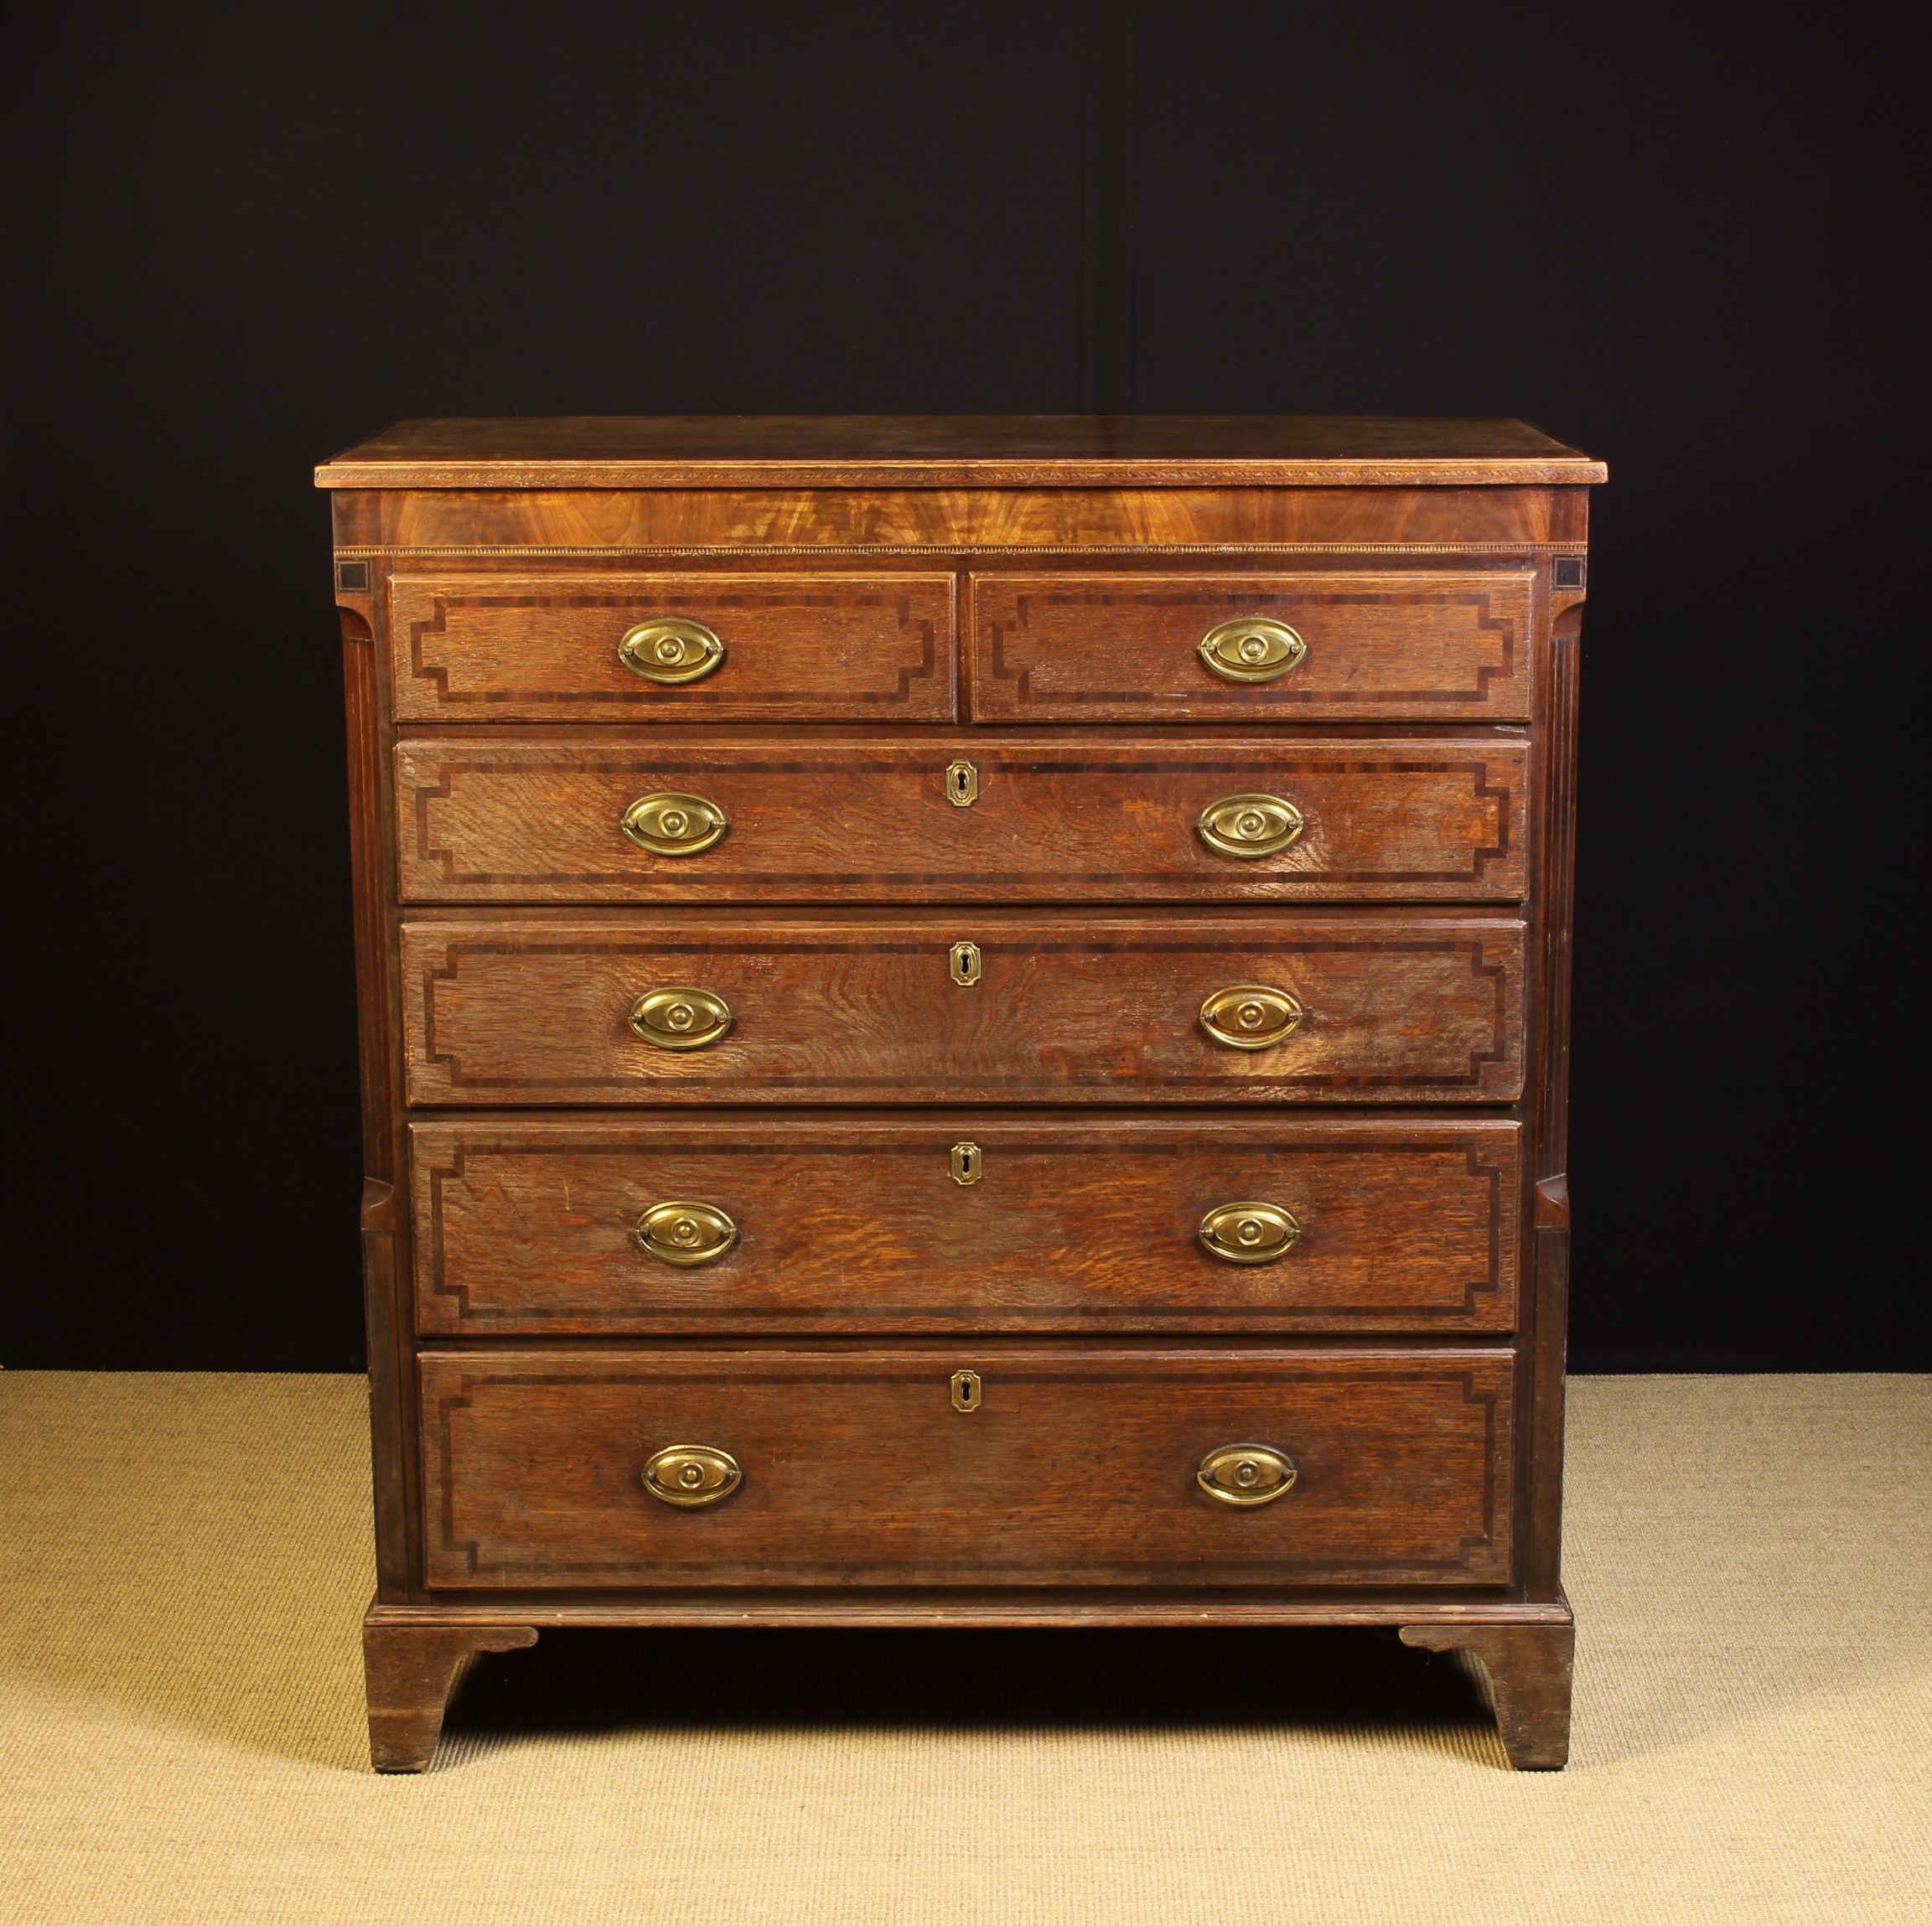 A Large Georgian Inlaid Oak Chest of Drawers. - Image 2 of 3